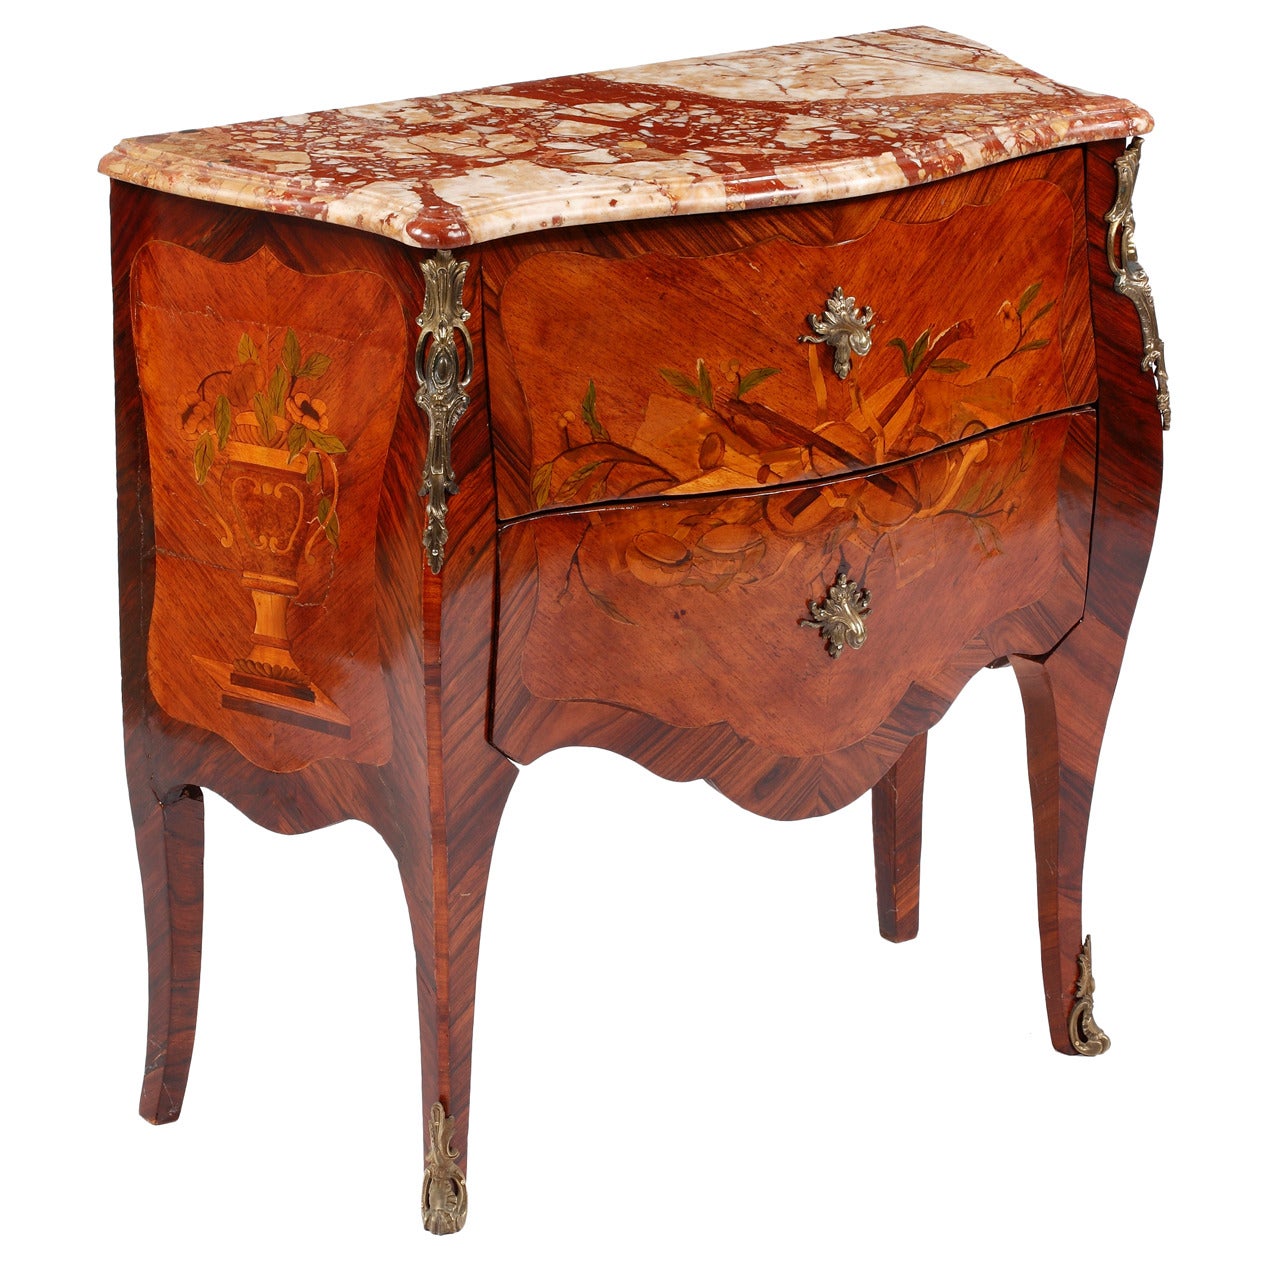 A Fine Louis XV Kingwood & Tulipwood Marquetry Commode by Leonard Boudin